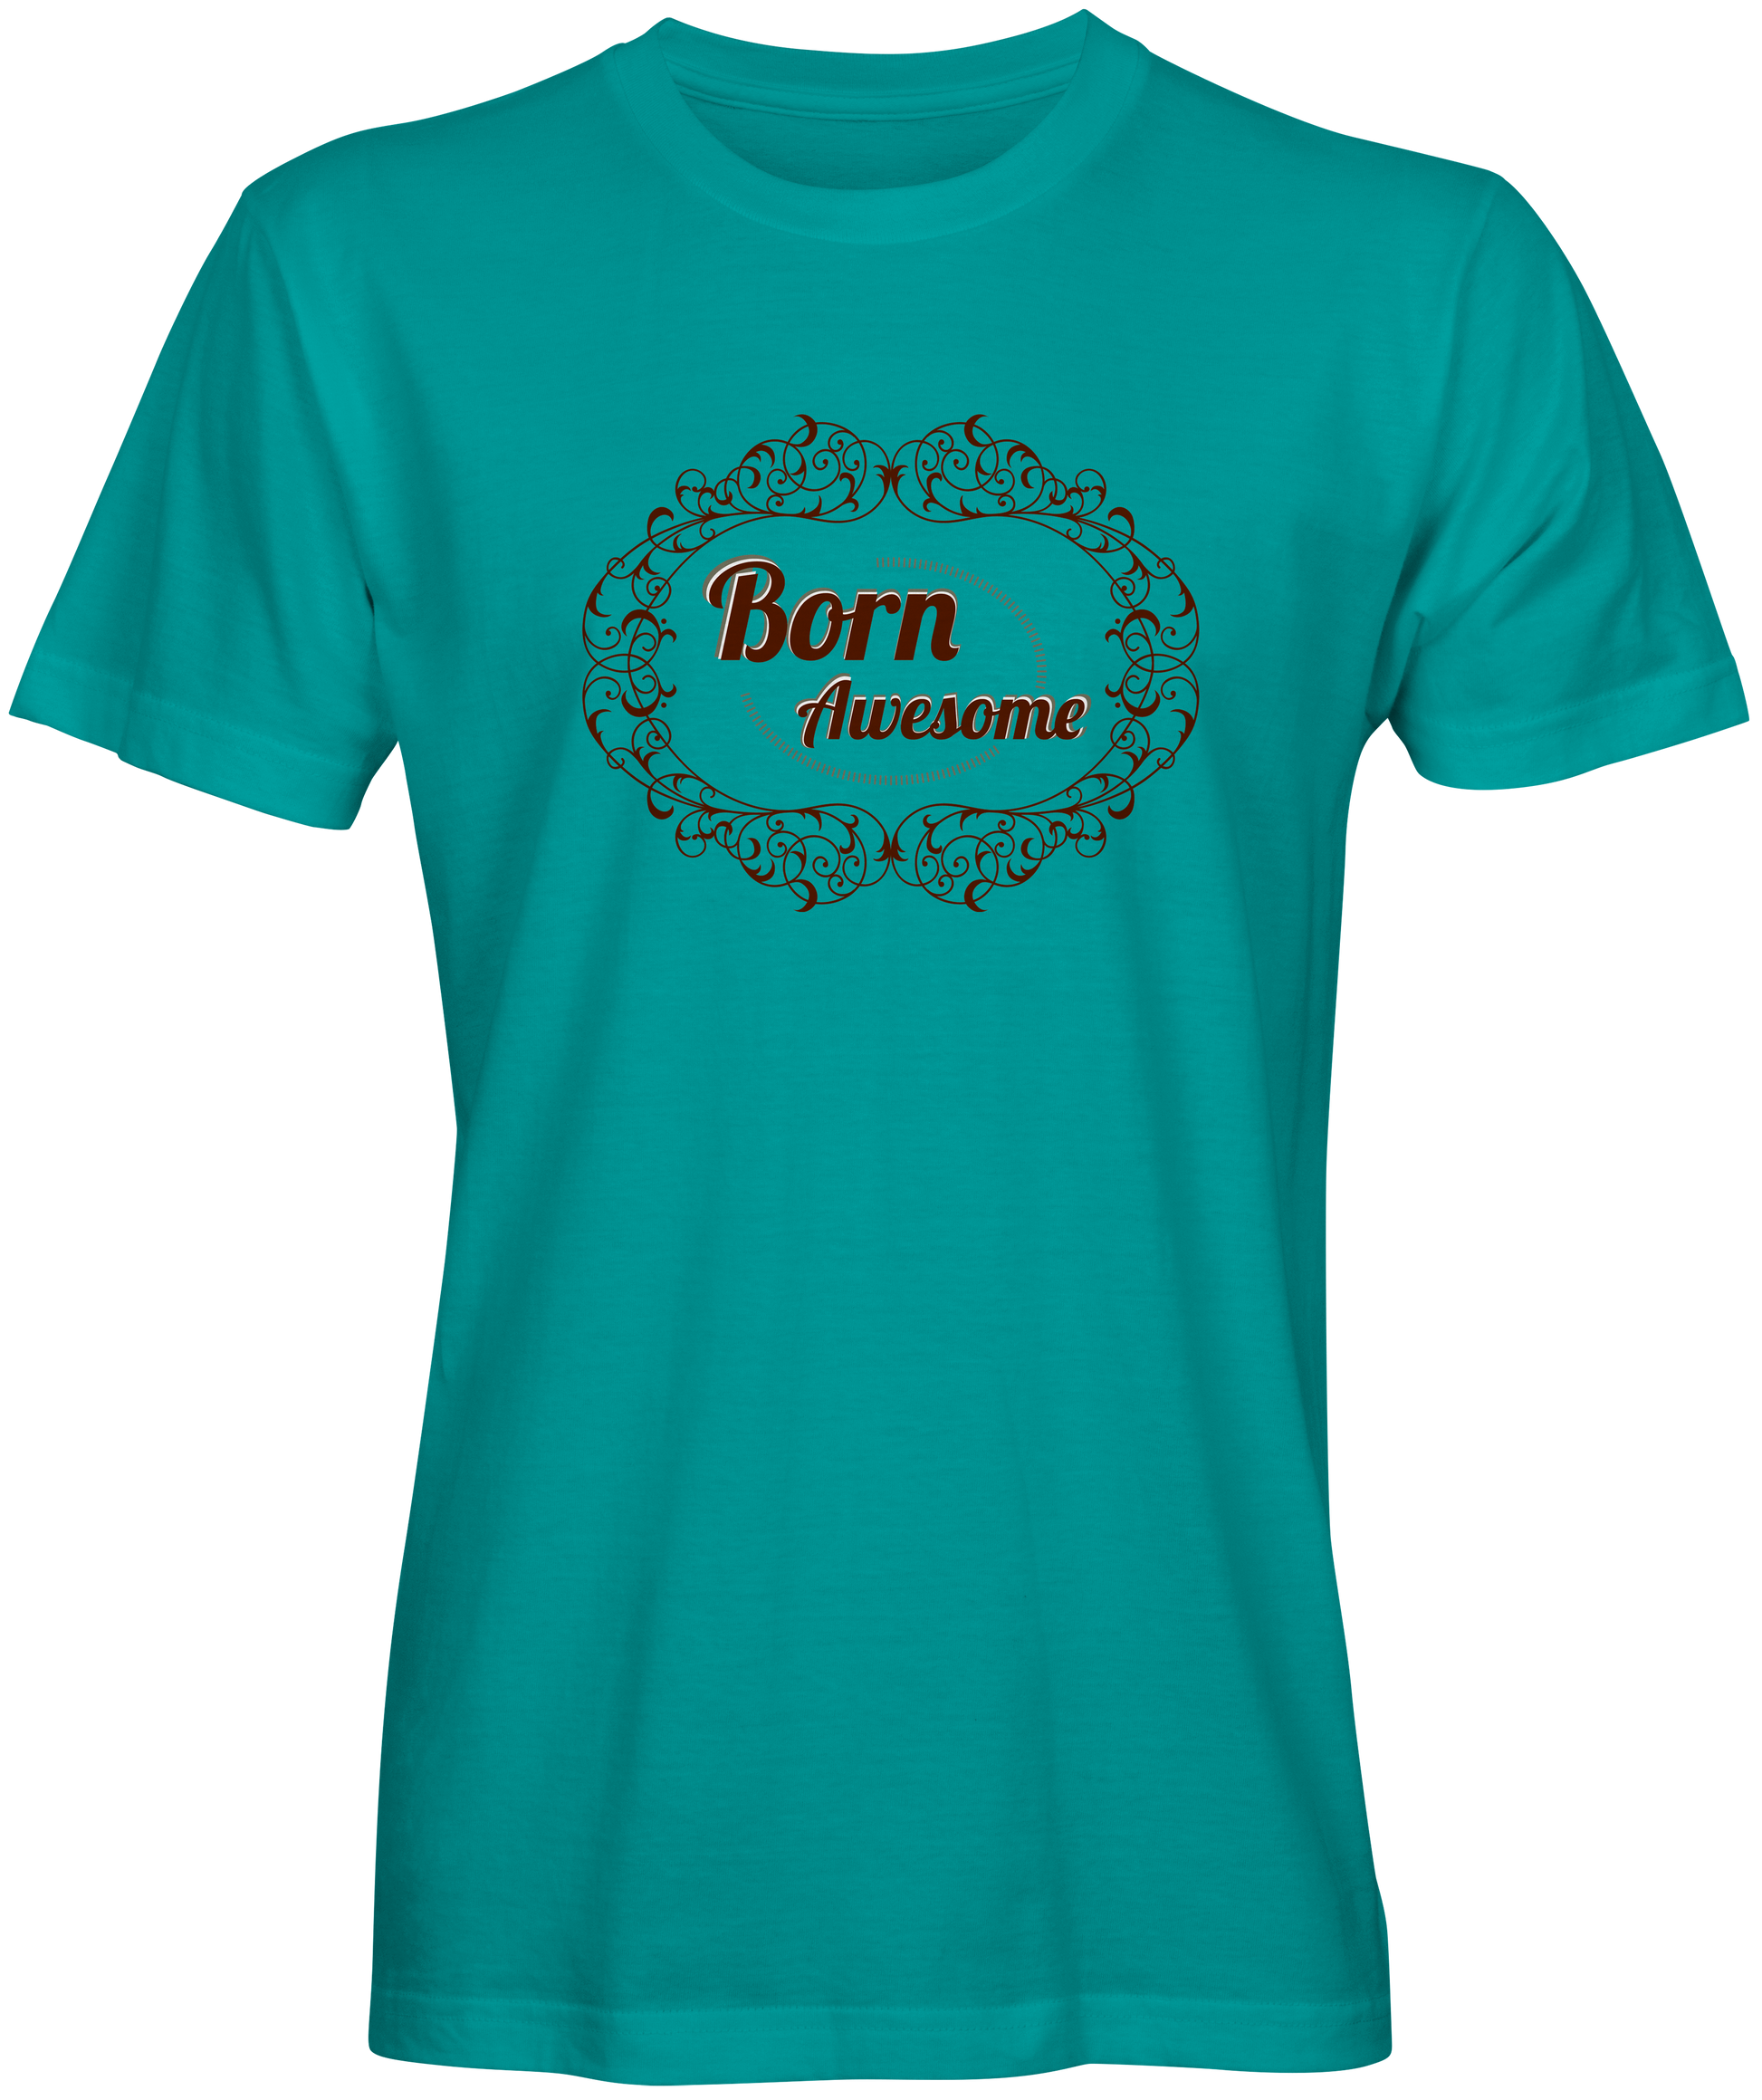 Born Awesome Slogan Tee for Sale